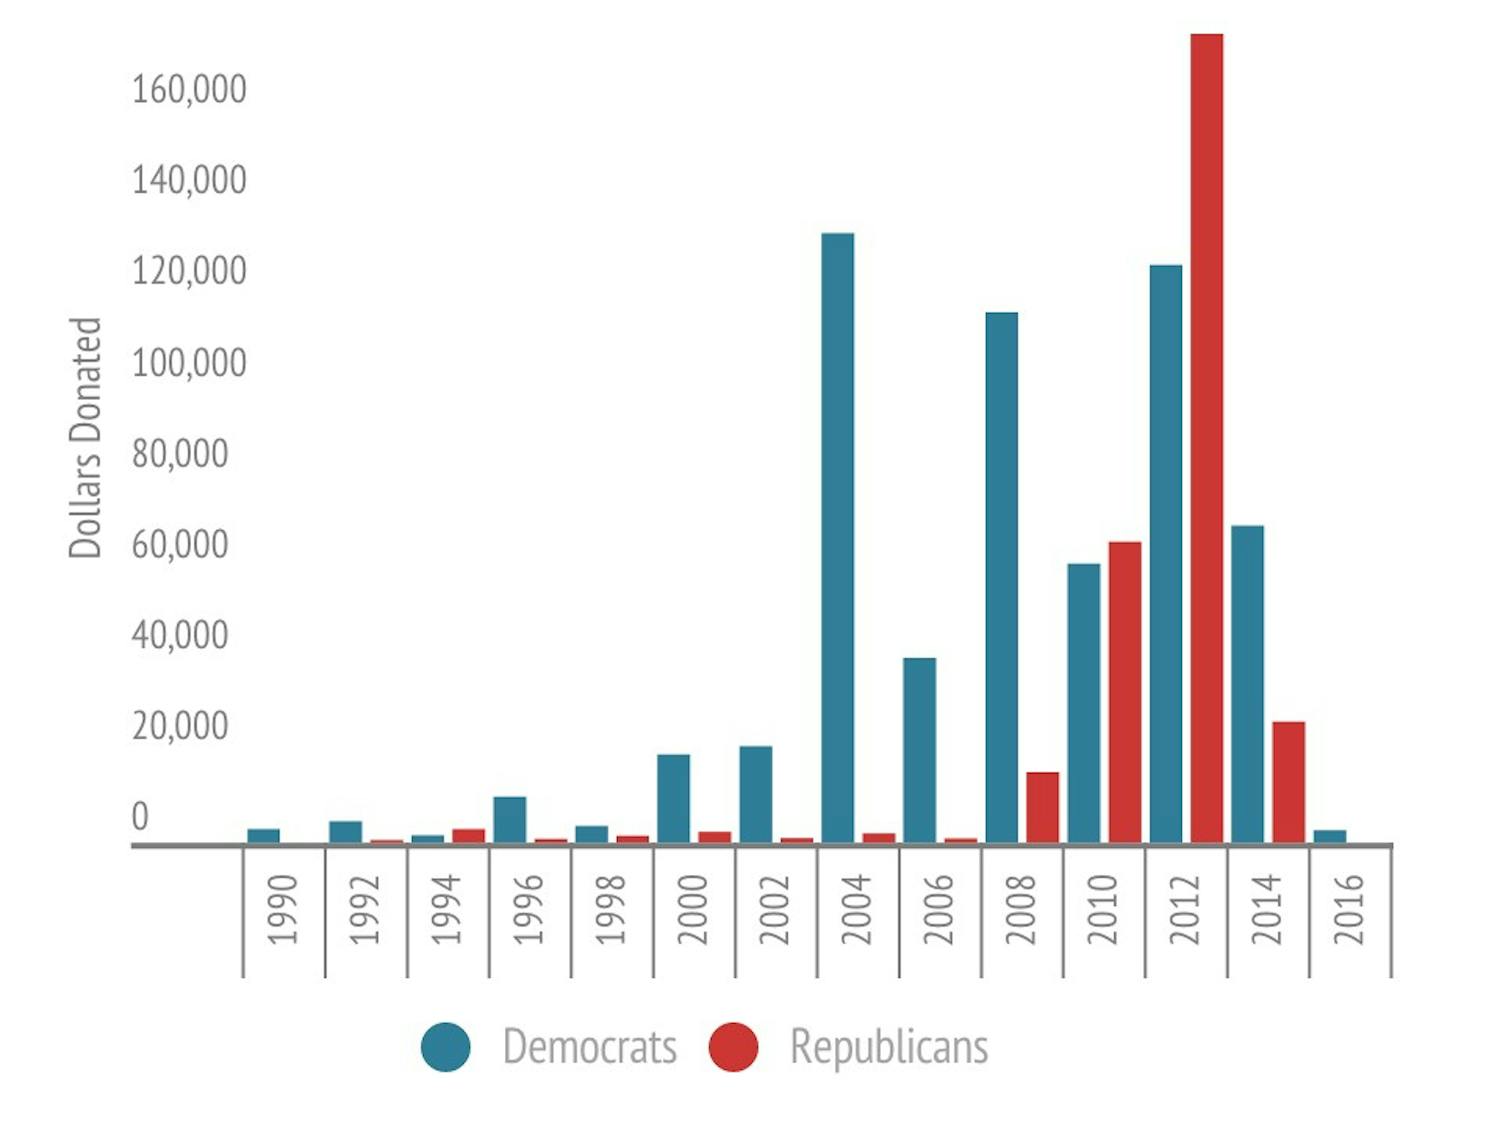 With the exception of the 2010 and 2012 election cycles, College professors have historically donated more to Democratic candidates than Republicans. 